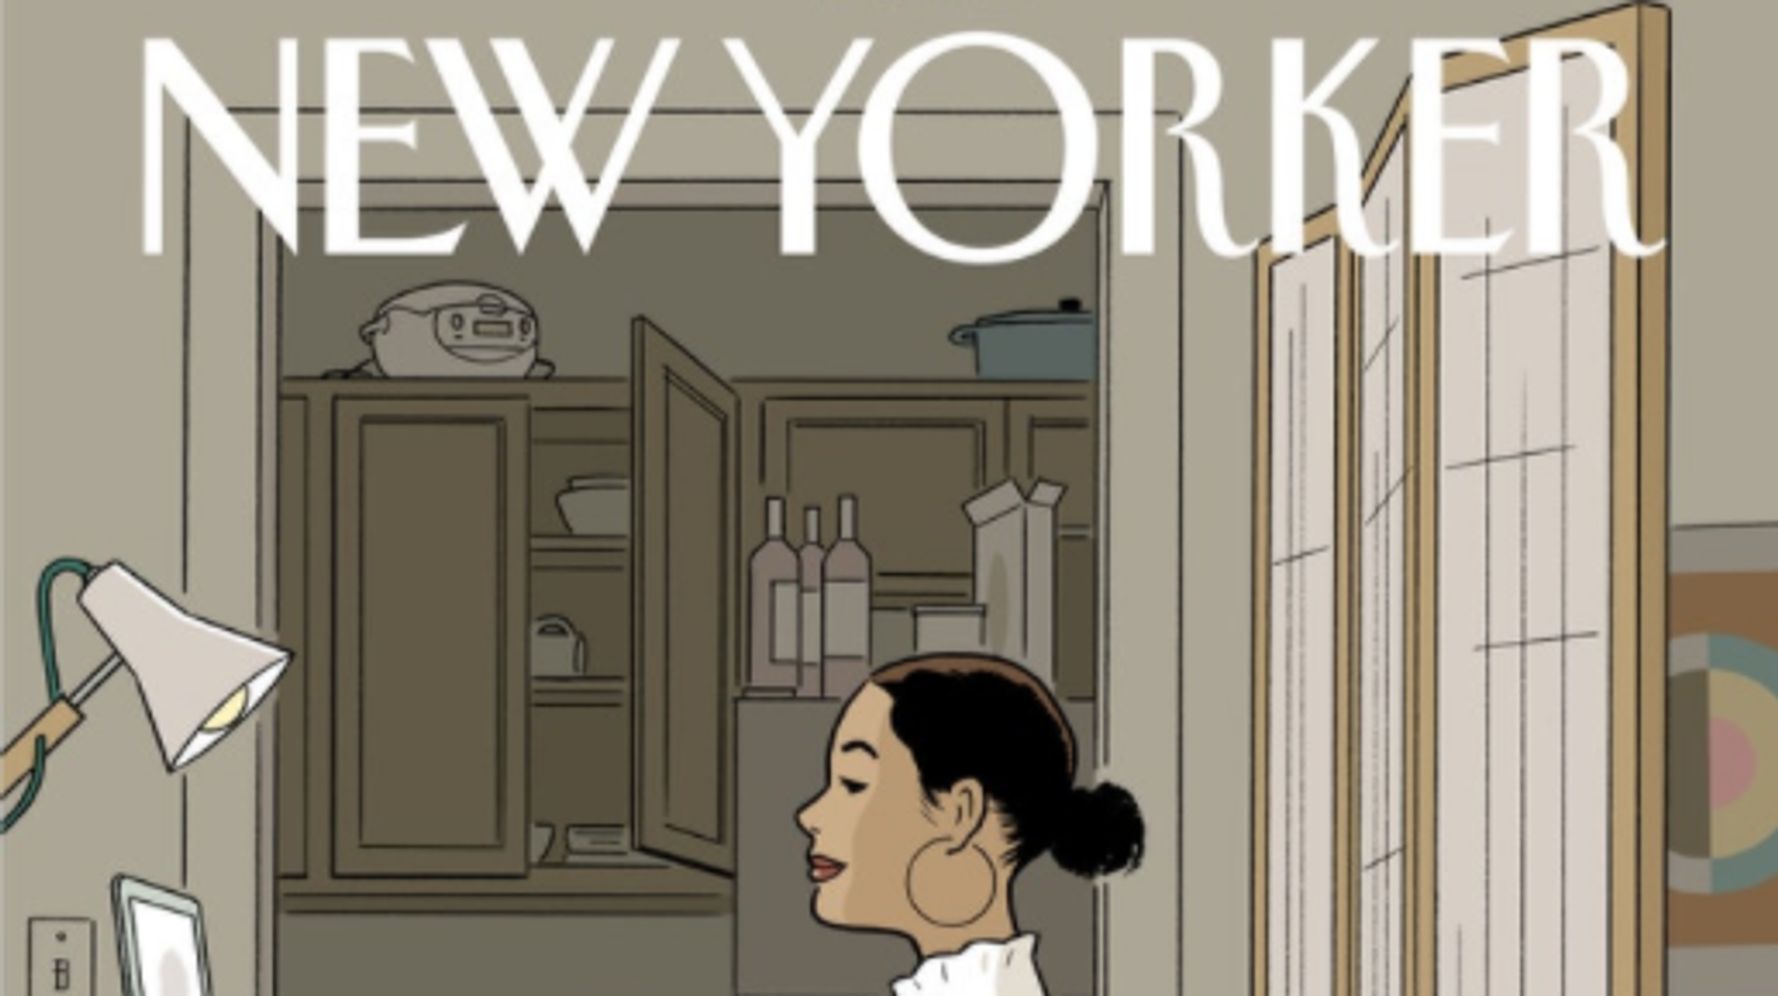 New Yorker Cover Goes Viral Because It's 'So Damn Relatable' For 2020